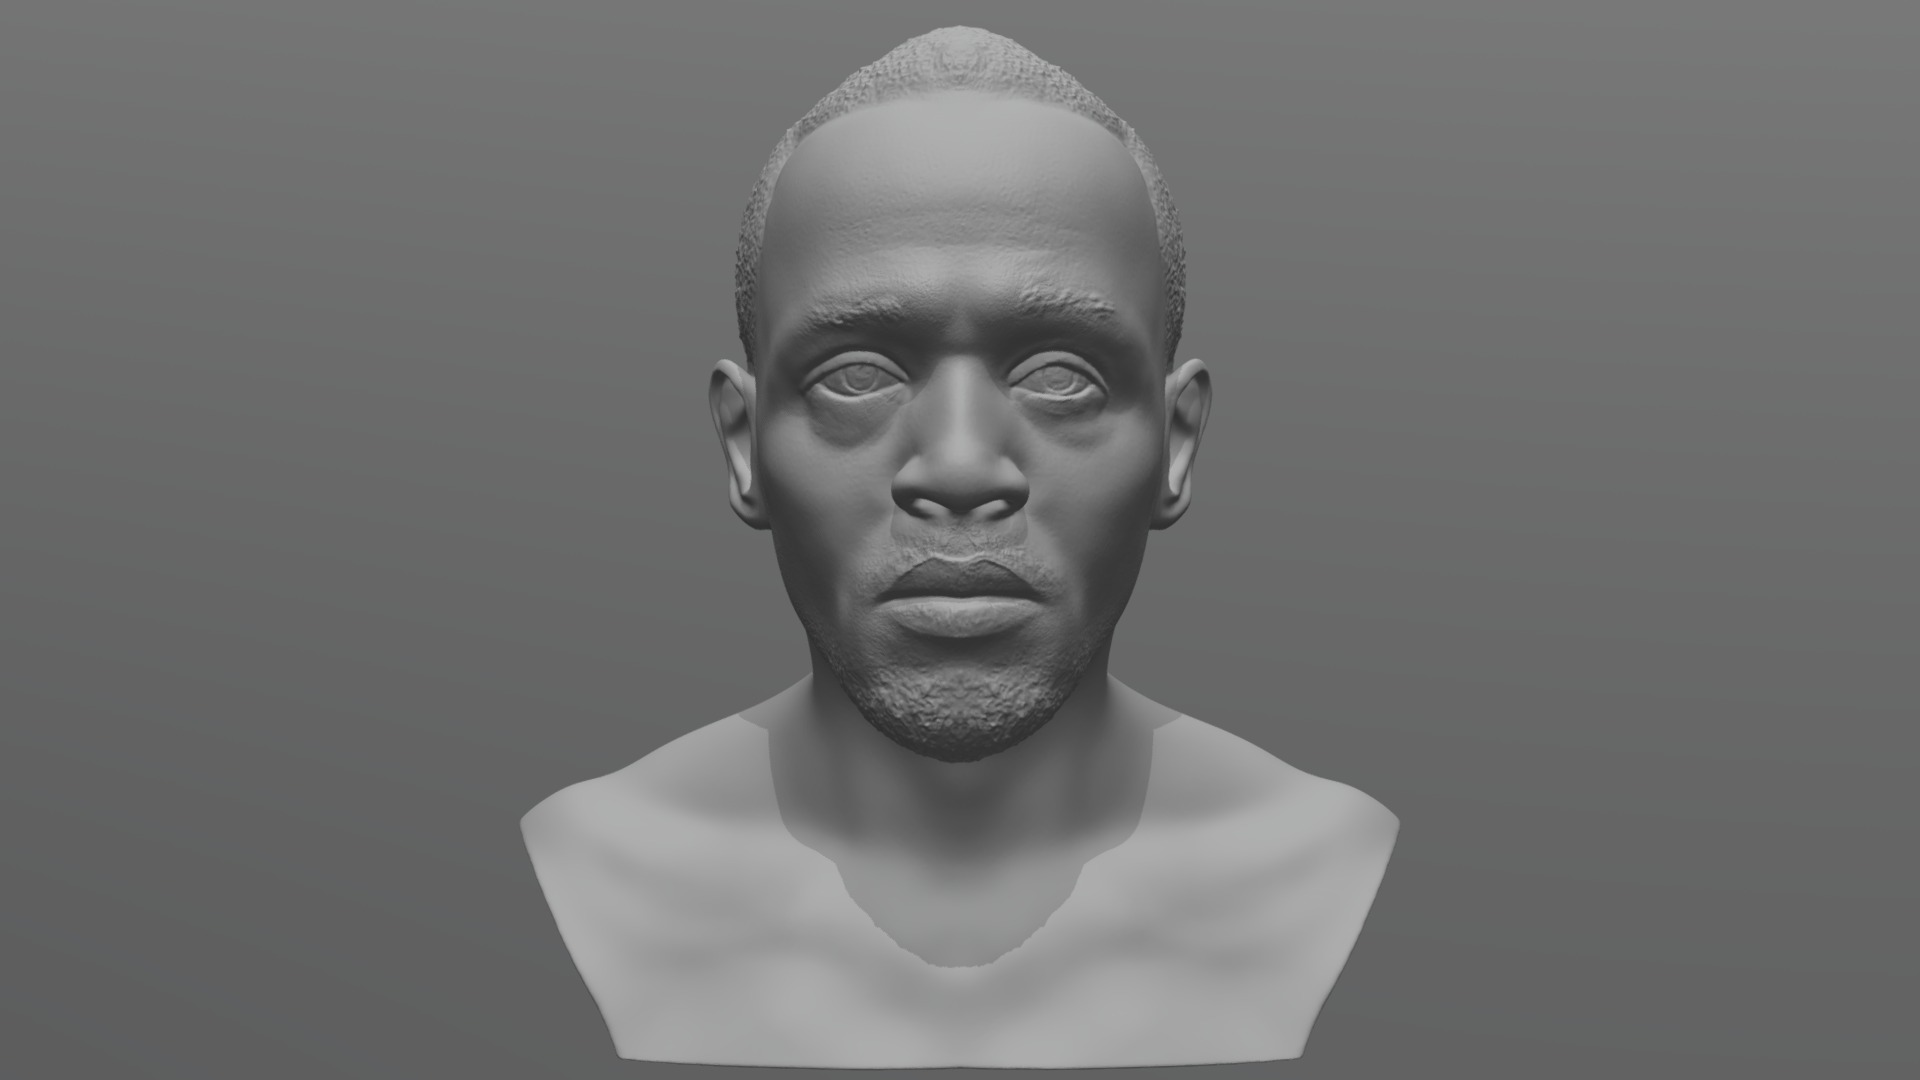 3D model Usain Bolt bust for 3D printing - This is a 3D model of the Usain Bolt bust for 3D printing. The 3D model is about a man with a crown.